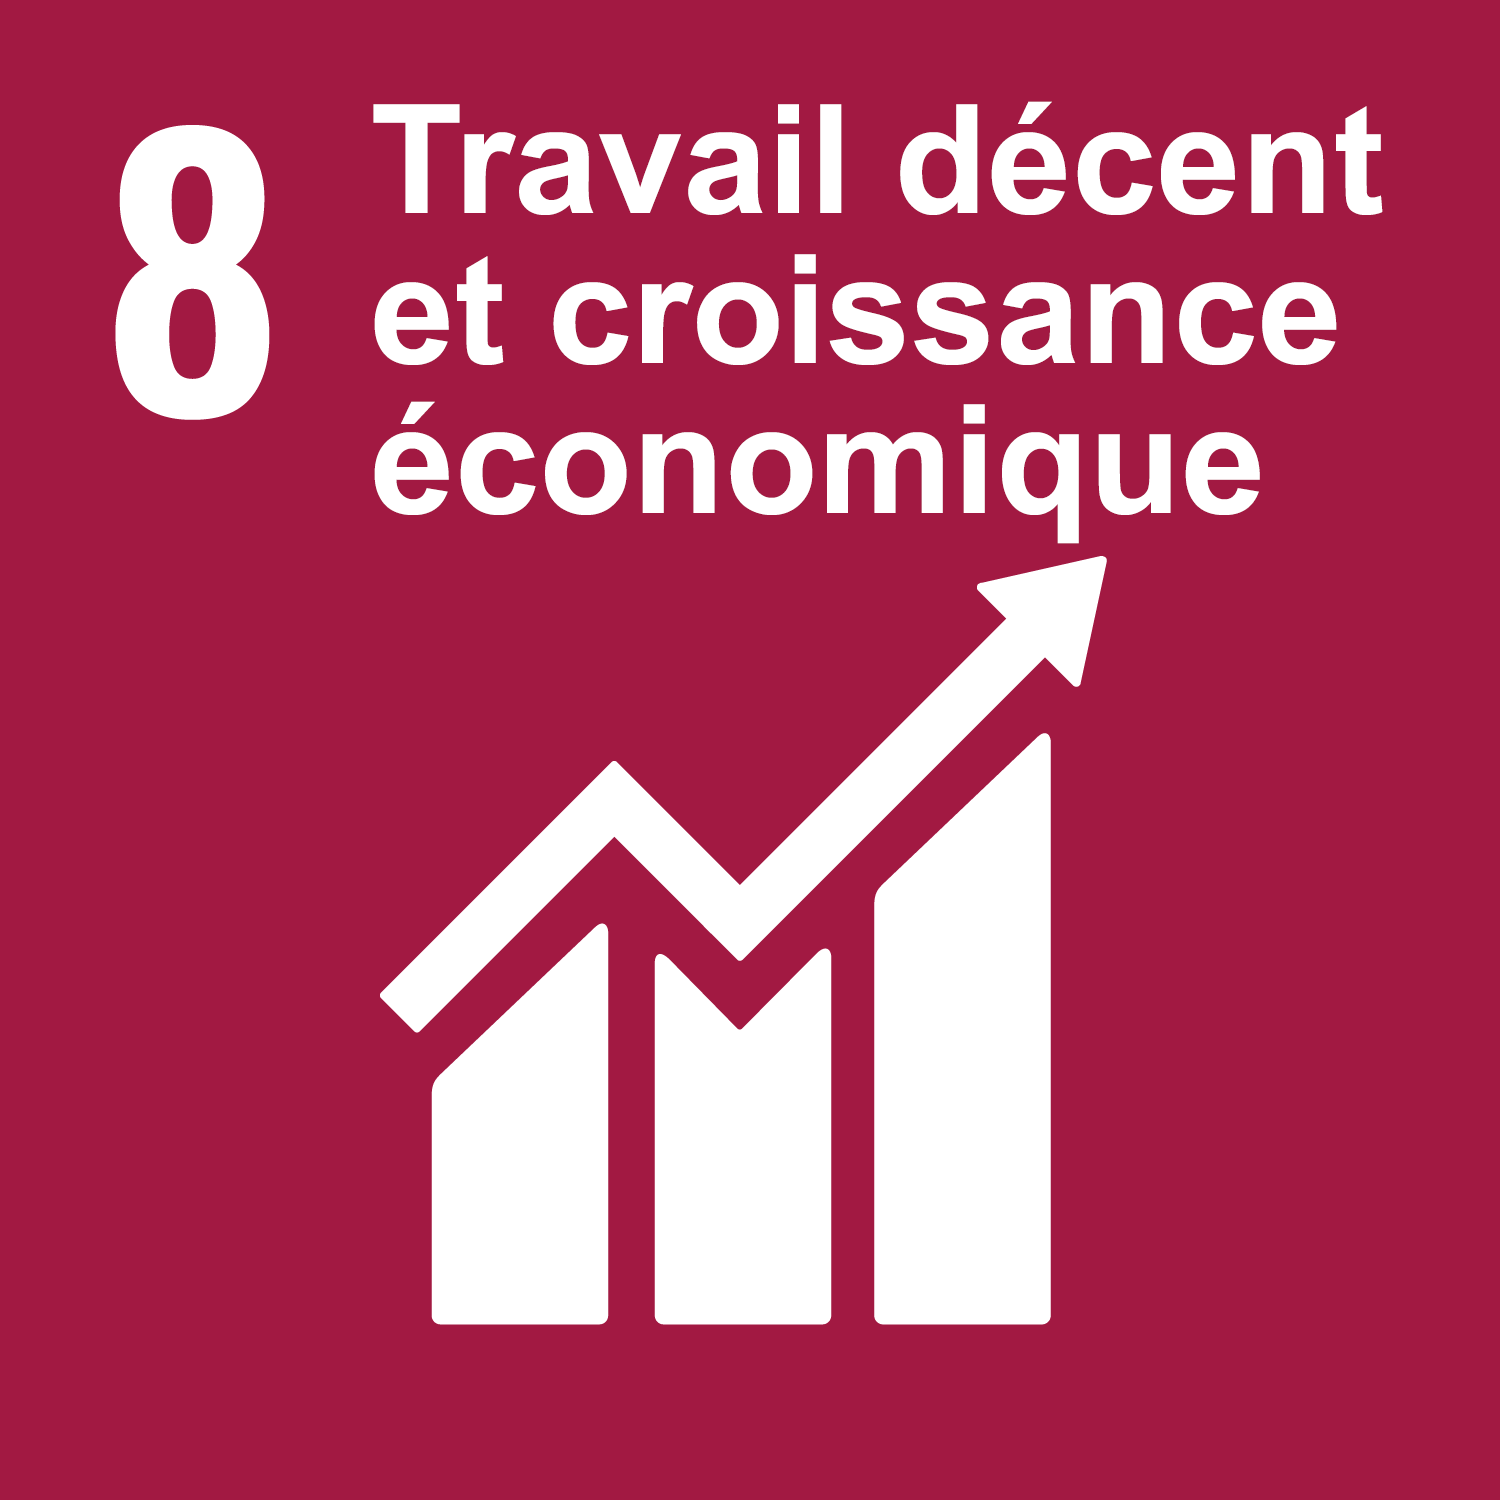 Goal 8: Decent work and economic growth 